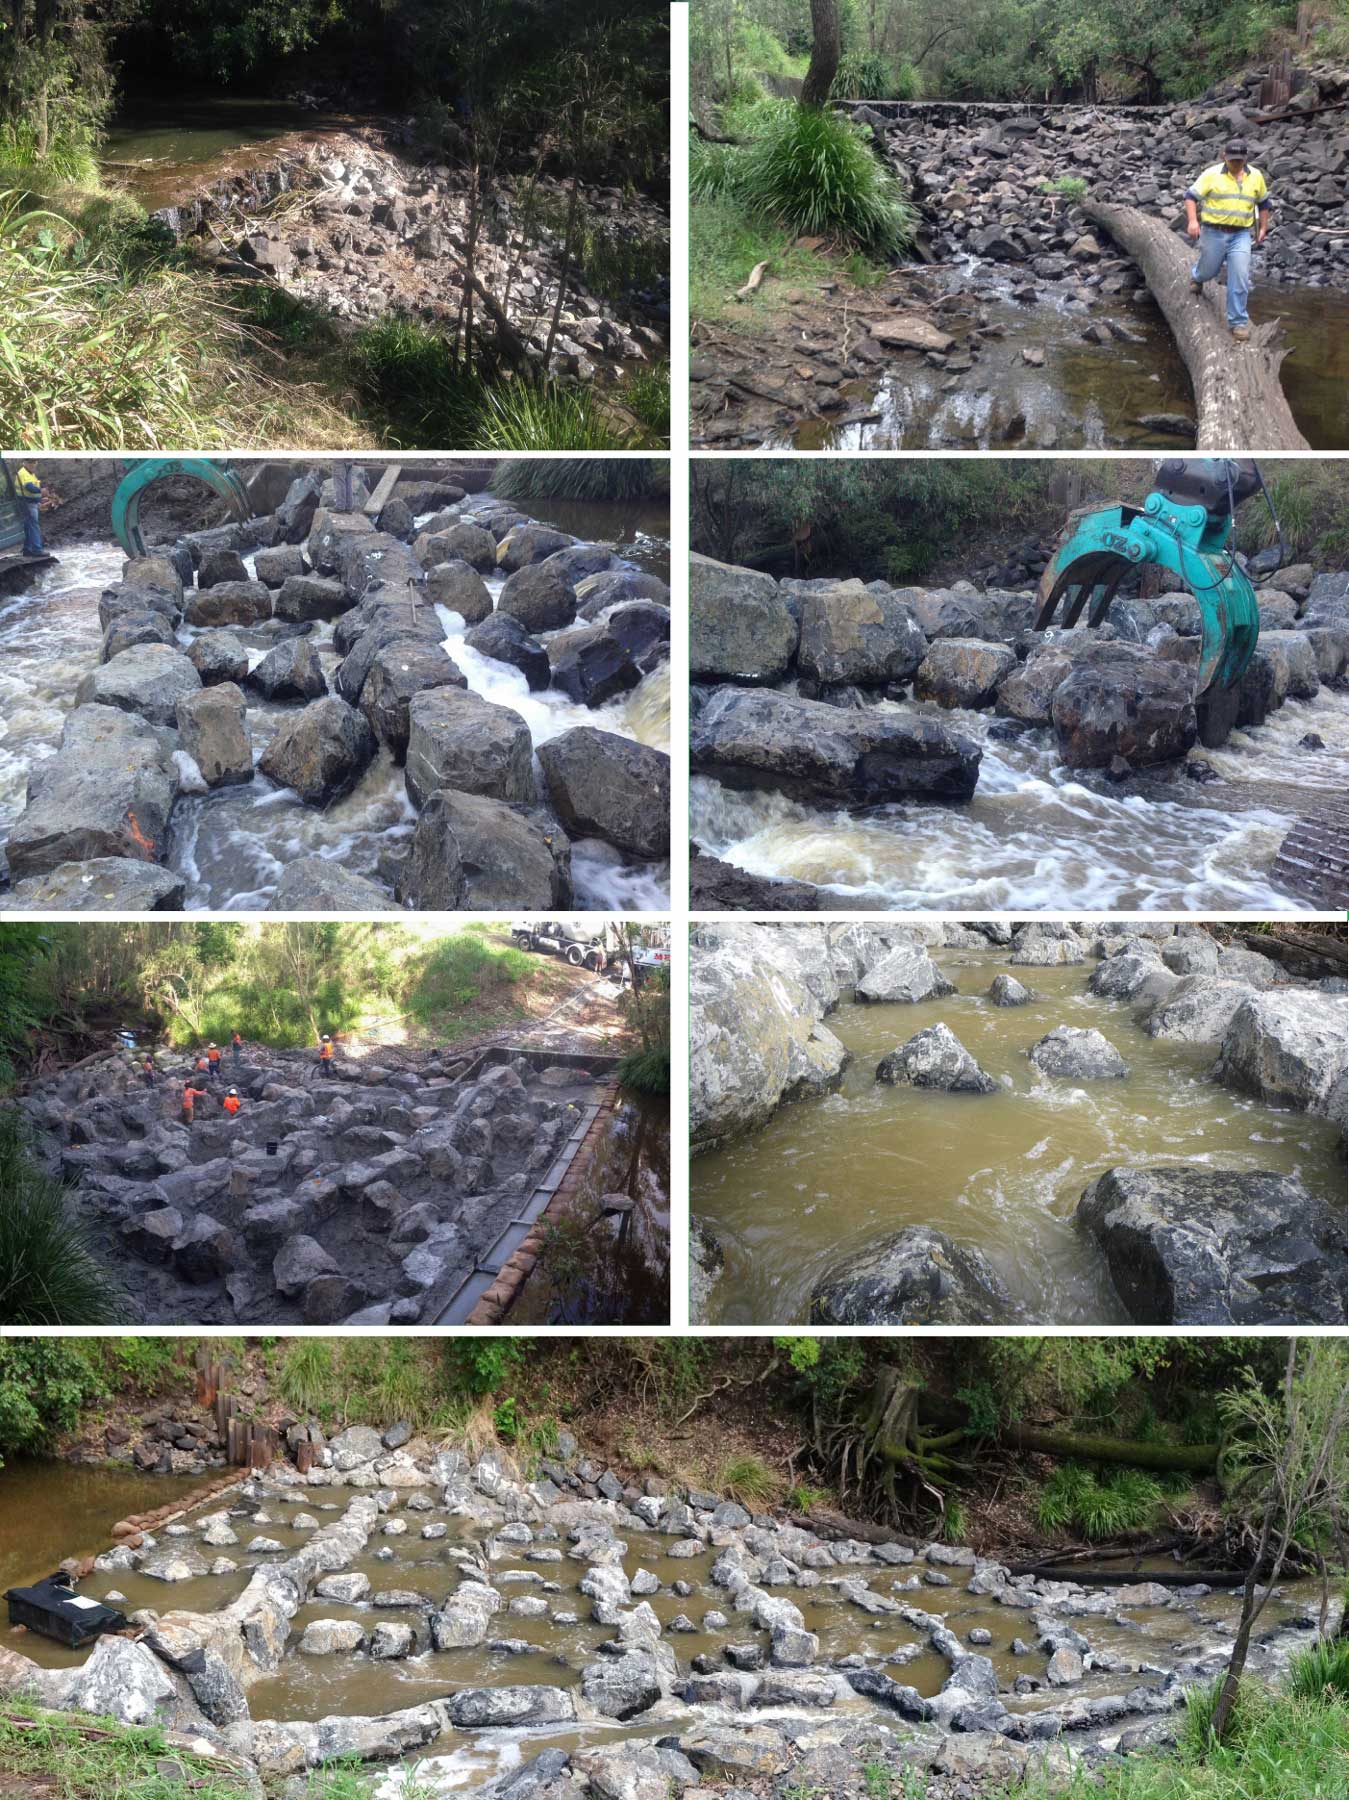 Figure 4: Retrofit fishway funded by local NRM group under Queensland development approval, supervised by Catchment Solutions, an entity that is suitably qualified in fish passage design and construction.